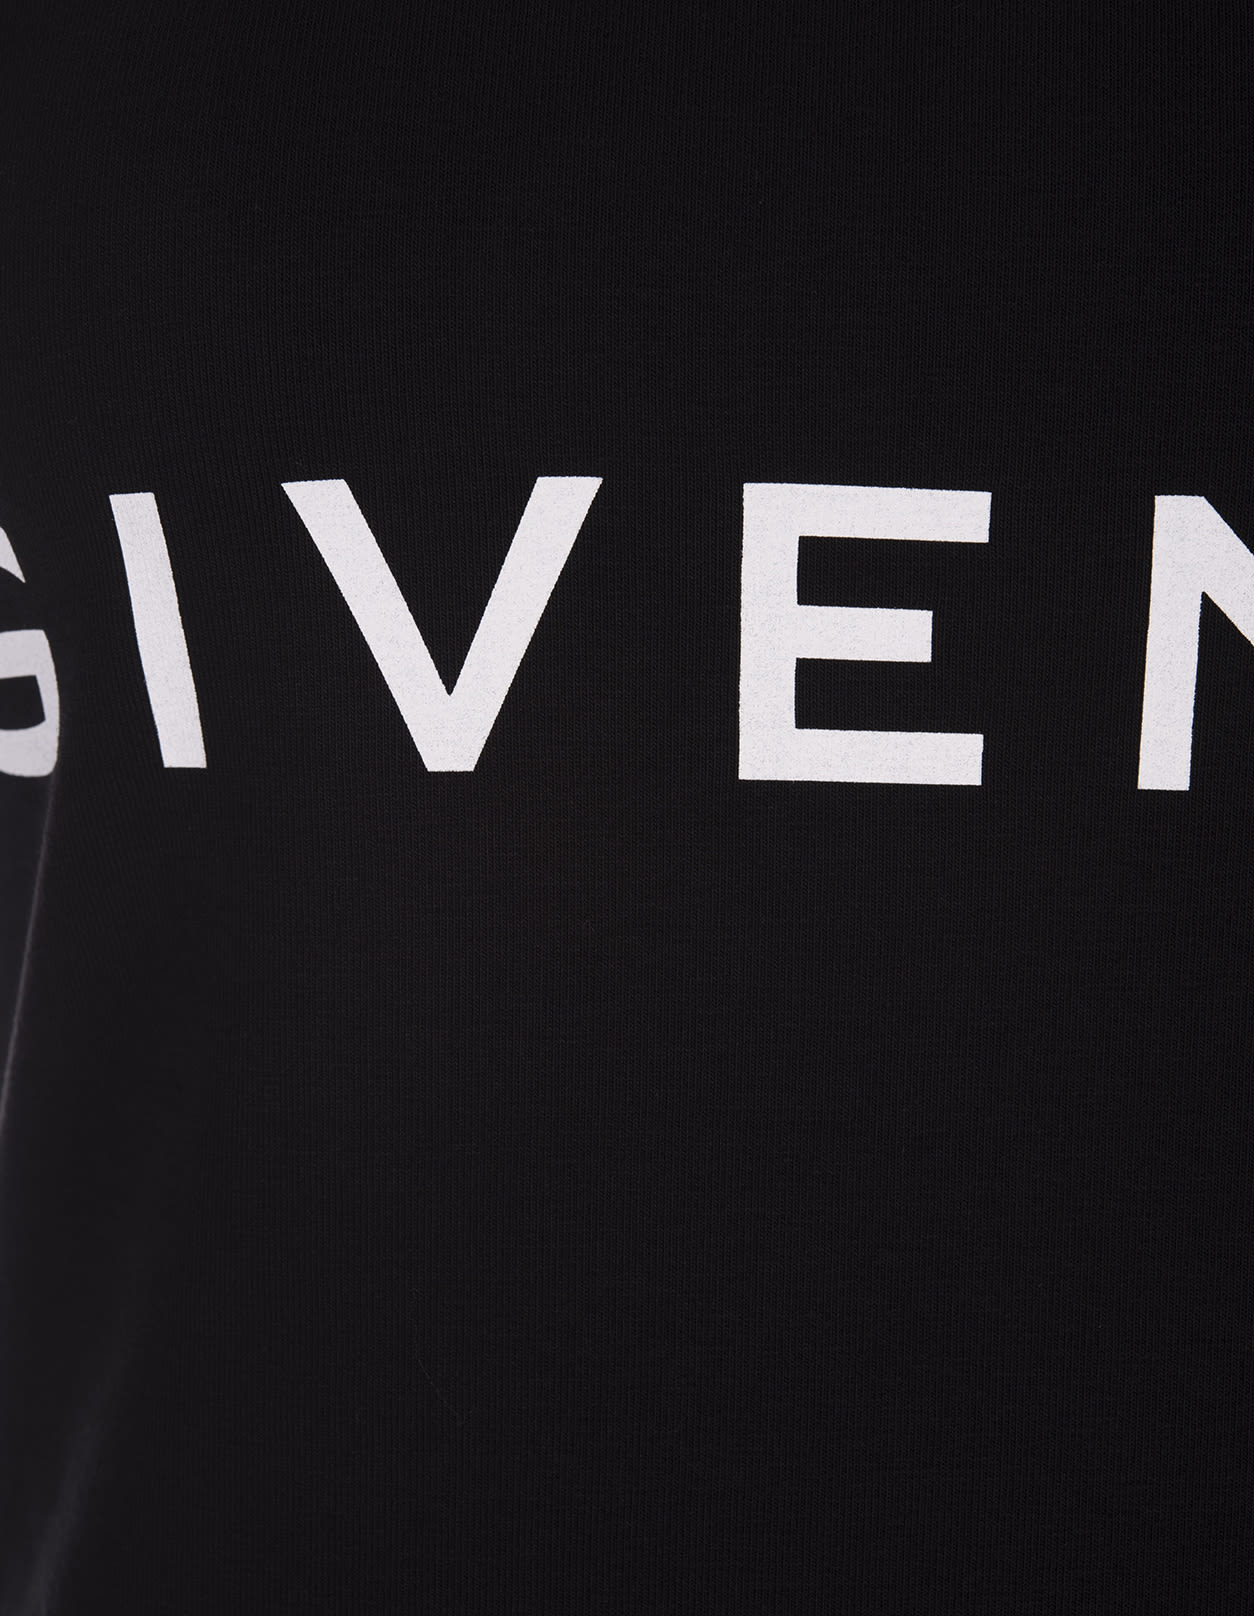 Shop Givenchy Archetype Tank Top In Black Cotton